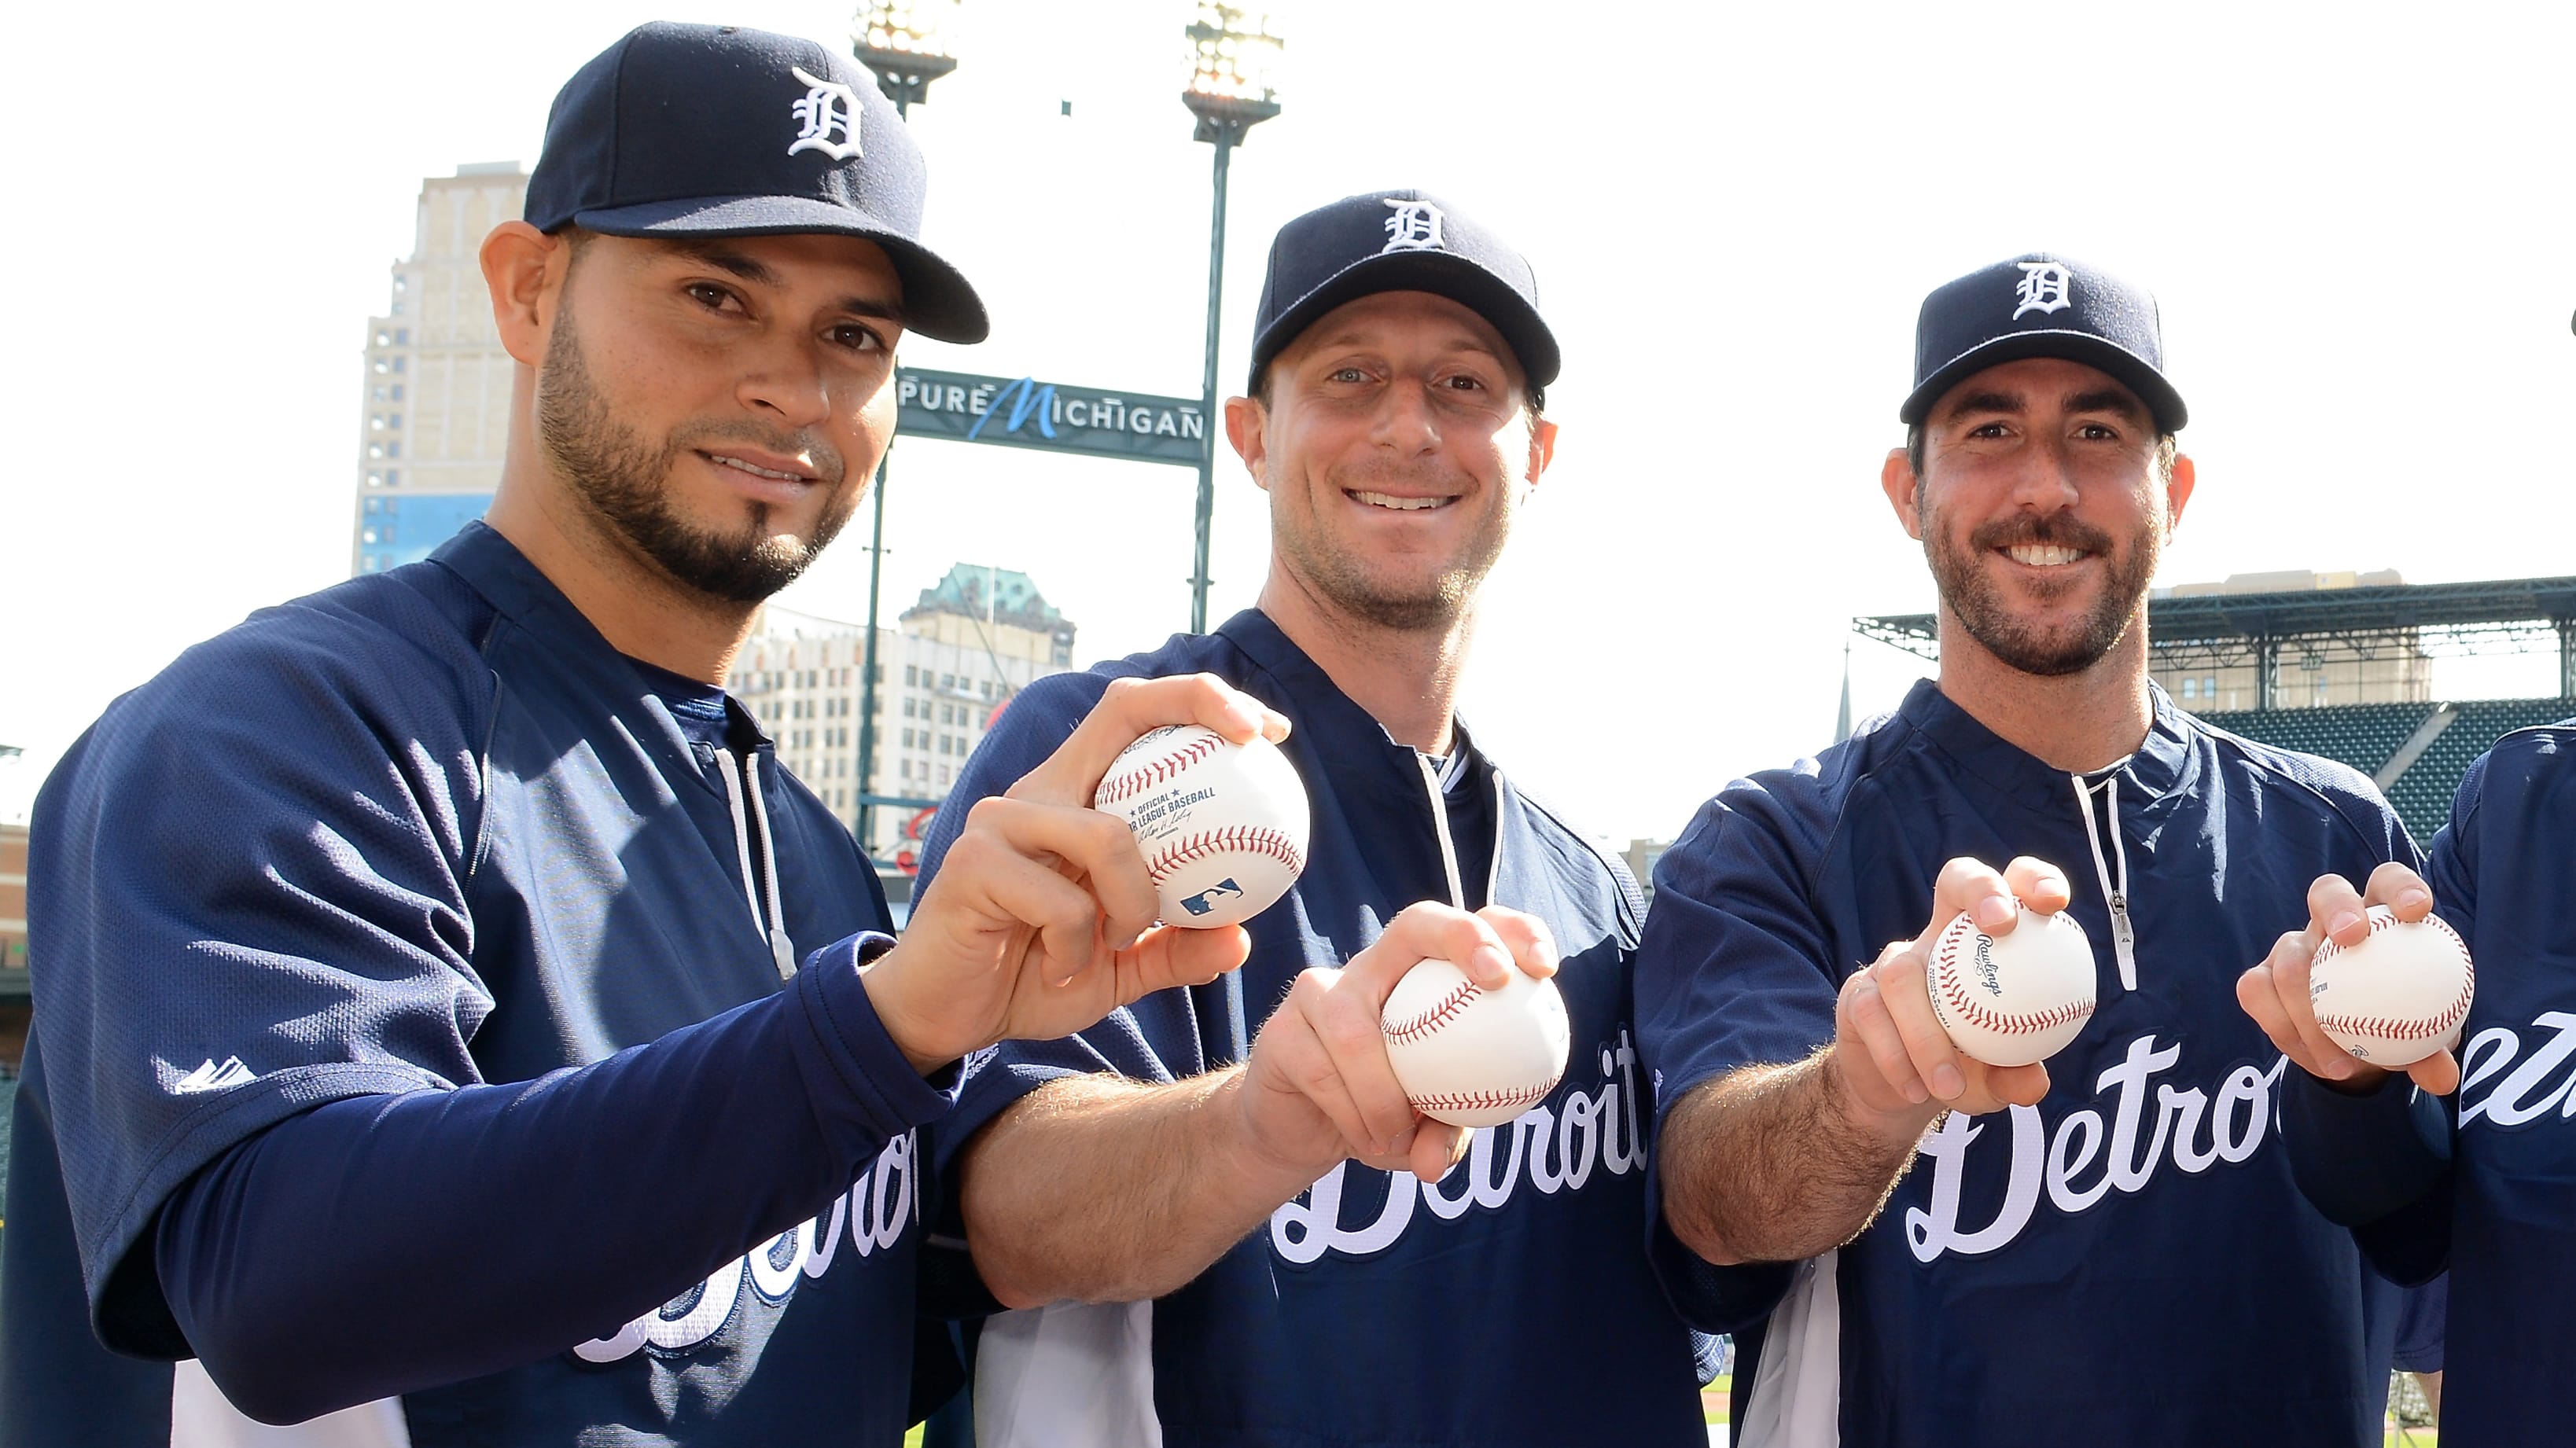 Detroit Tigers Entire 2014 Starting Rotation Has Now Won a World Series Title